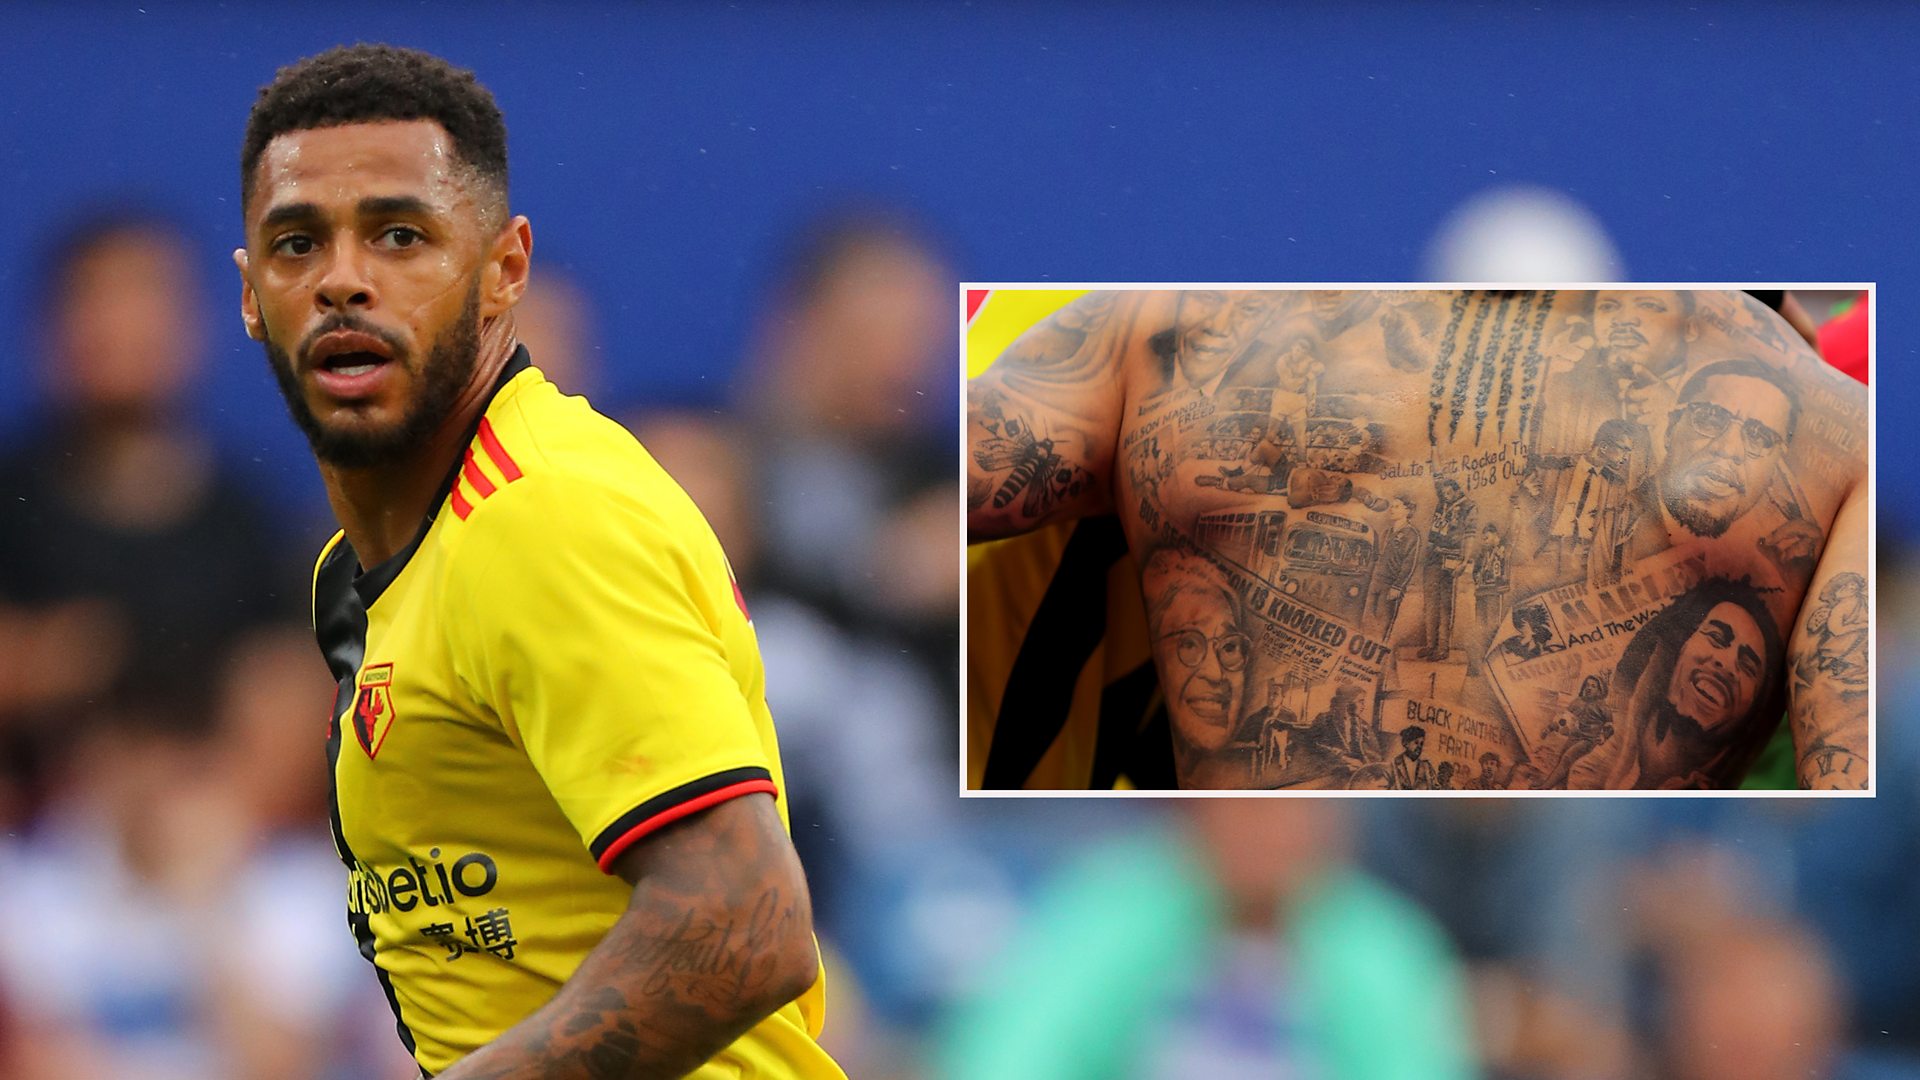 BBC - Footballer Andre Gray on the black history icons that make up his  tattoo